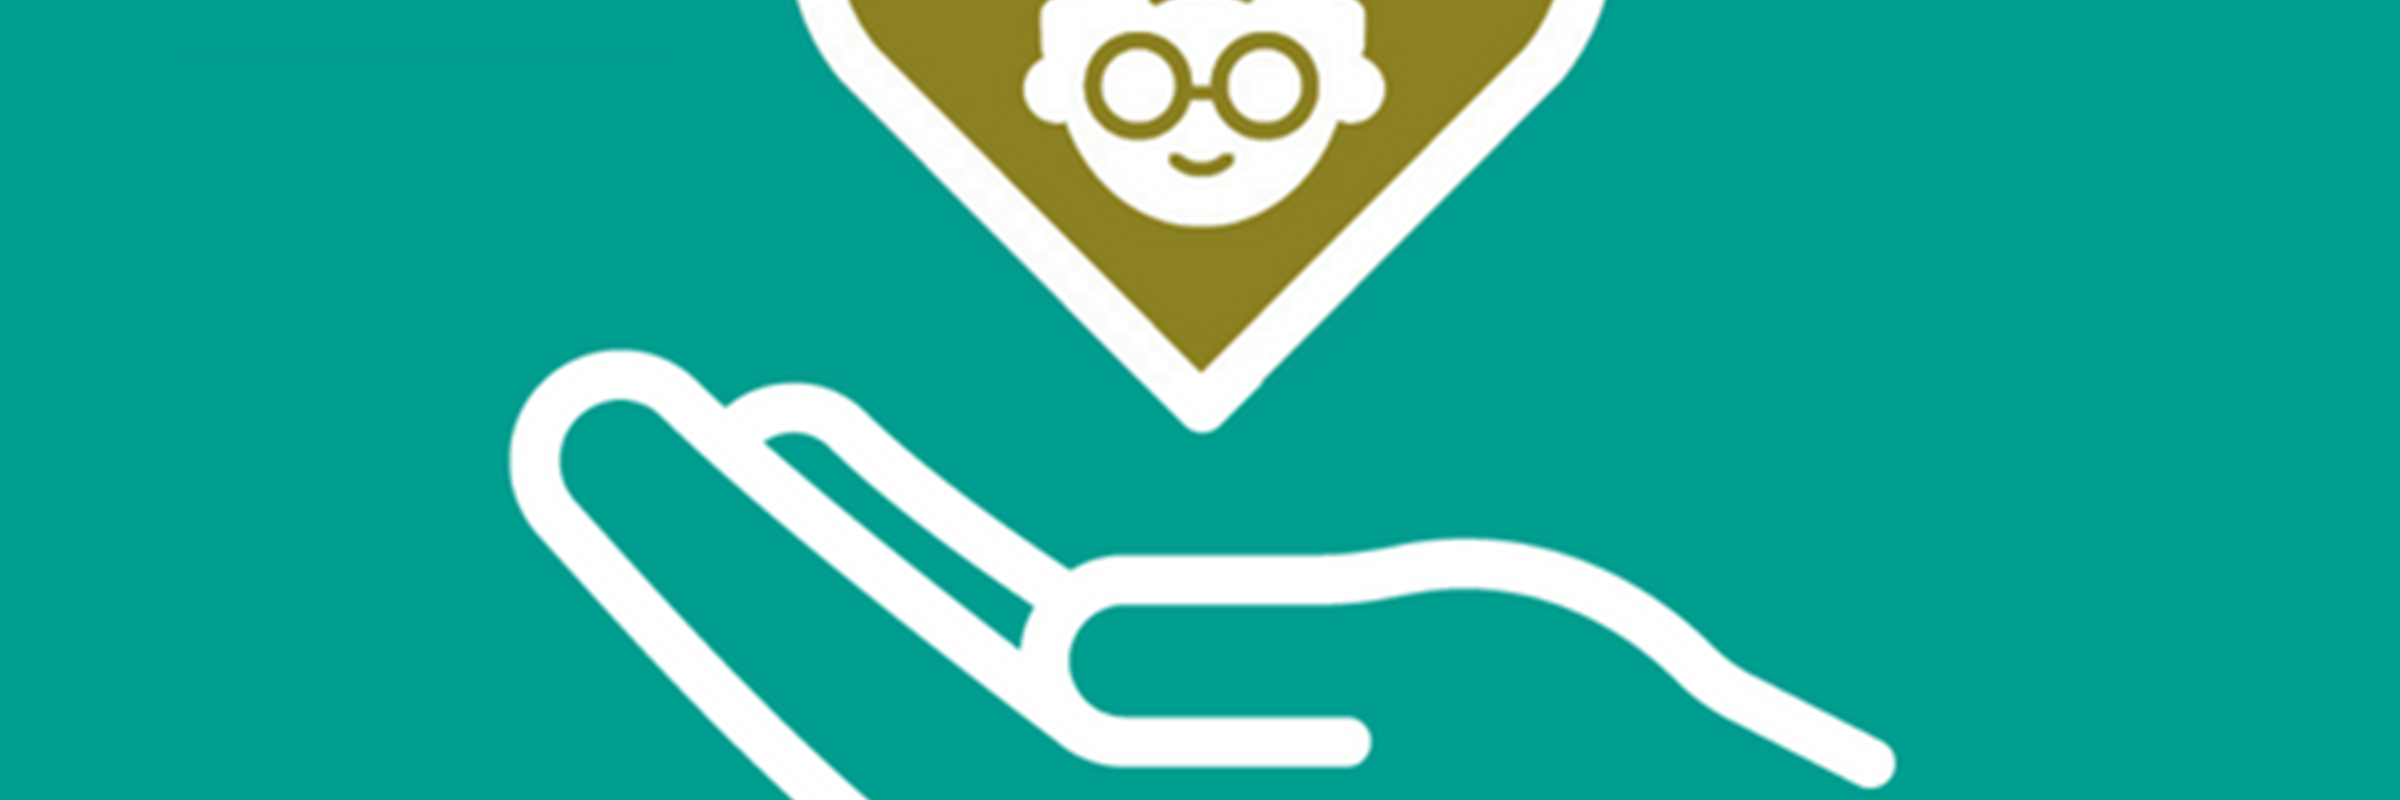 Heart icon with an icon of an older person wearing glasses. This is positioned above an open hand